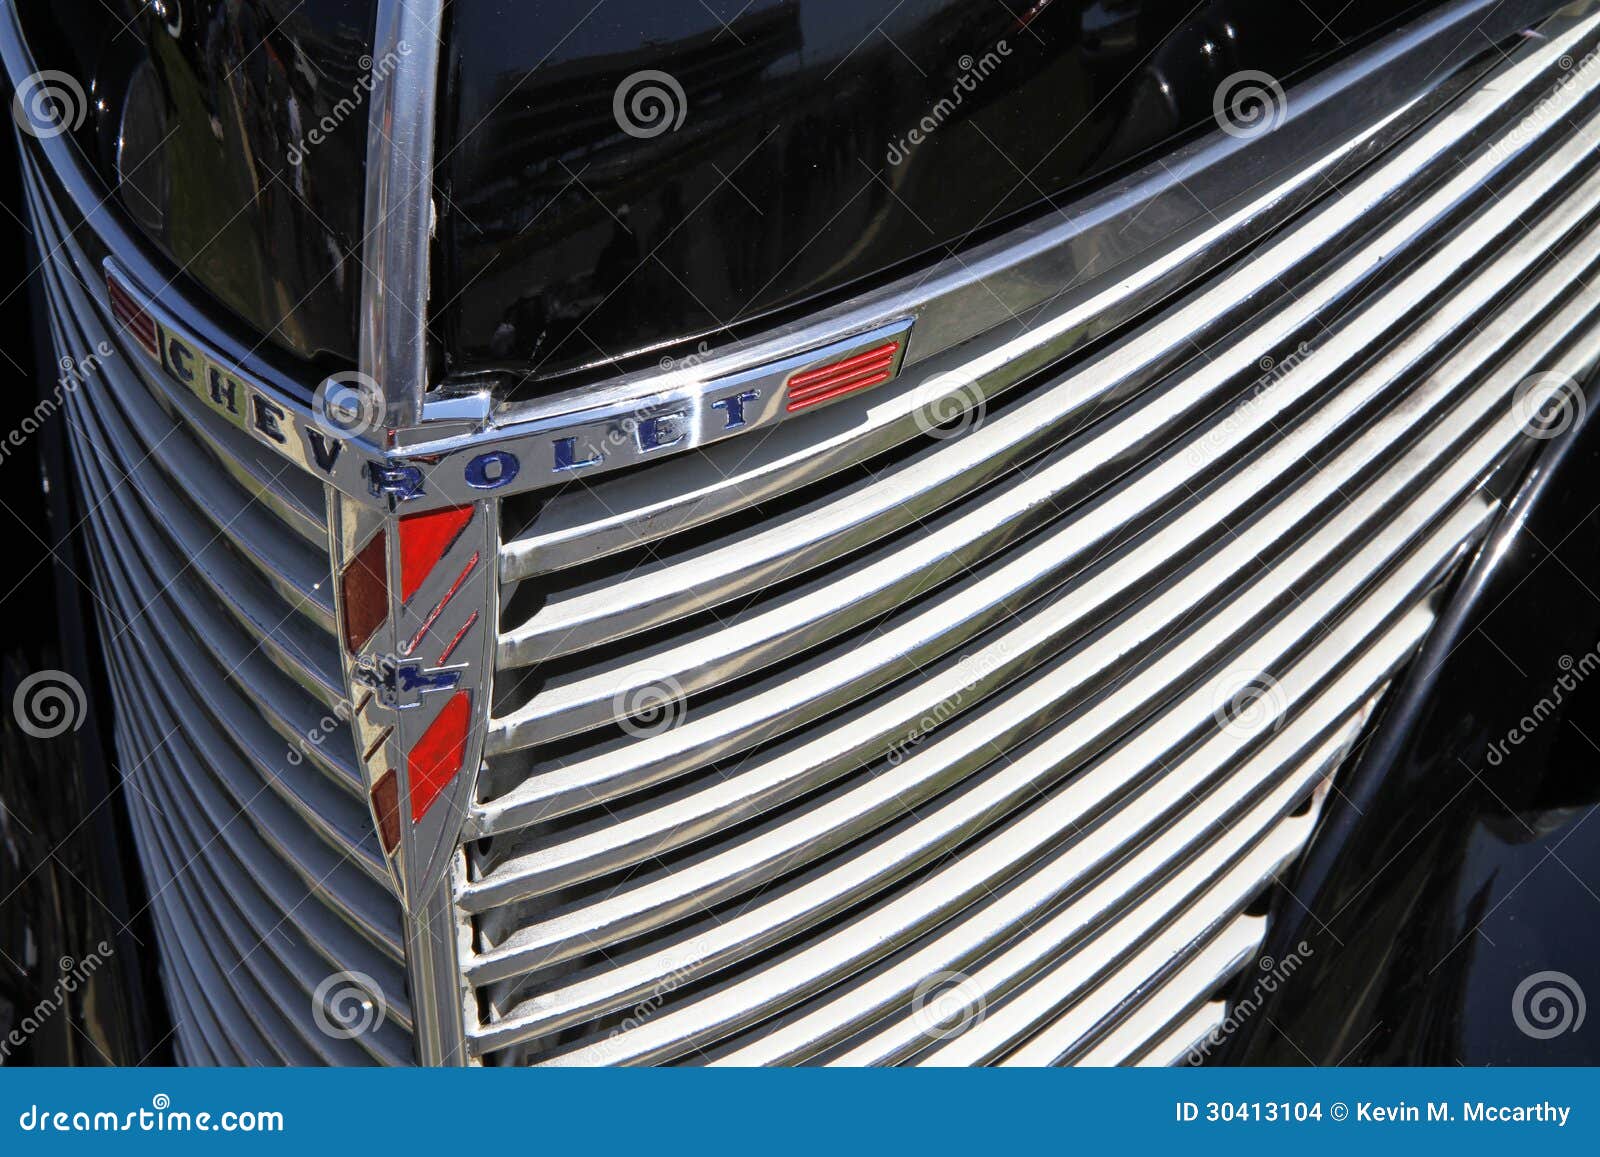 Antique Chevrolet Automobile Editorial Stock Image - Image of  transportation, american: 30413104